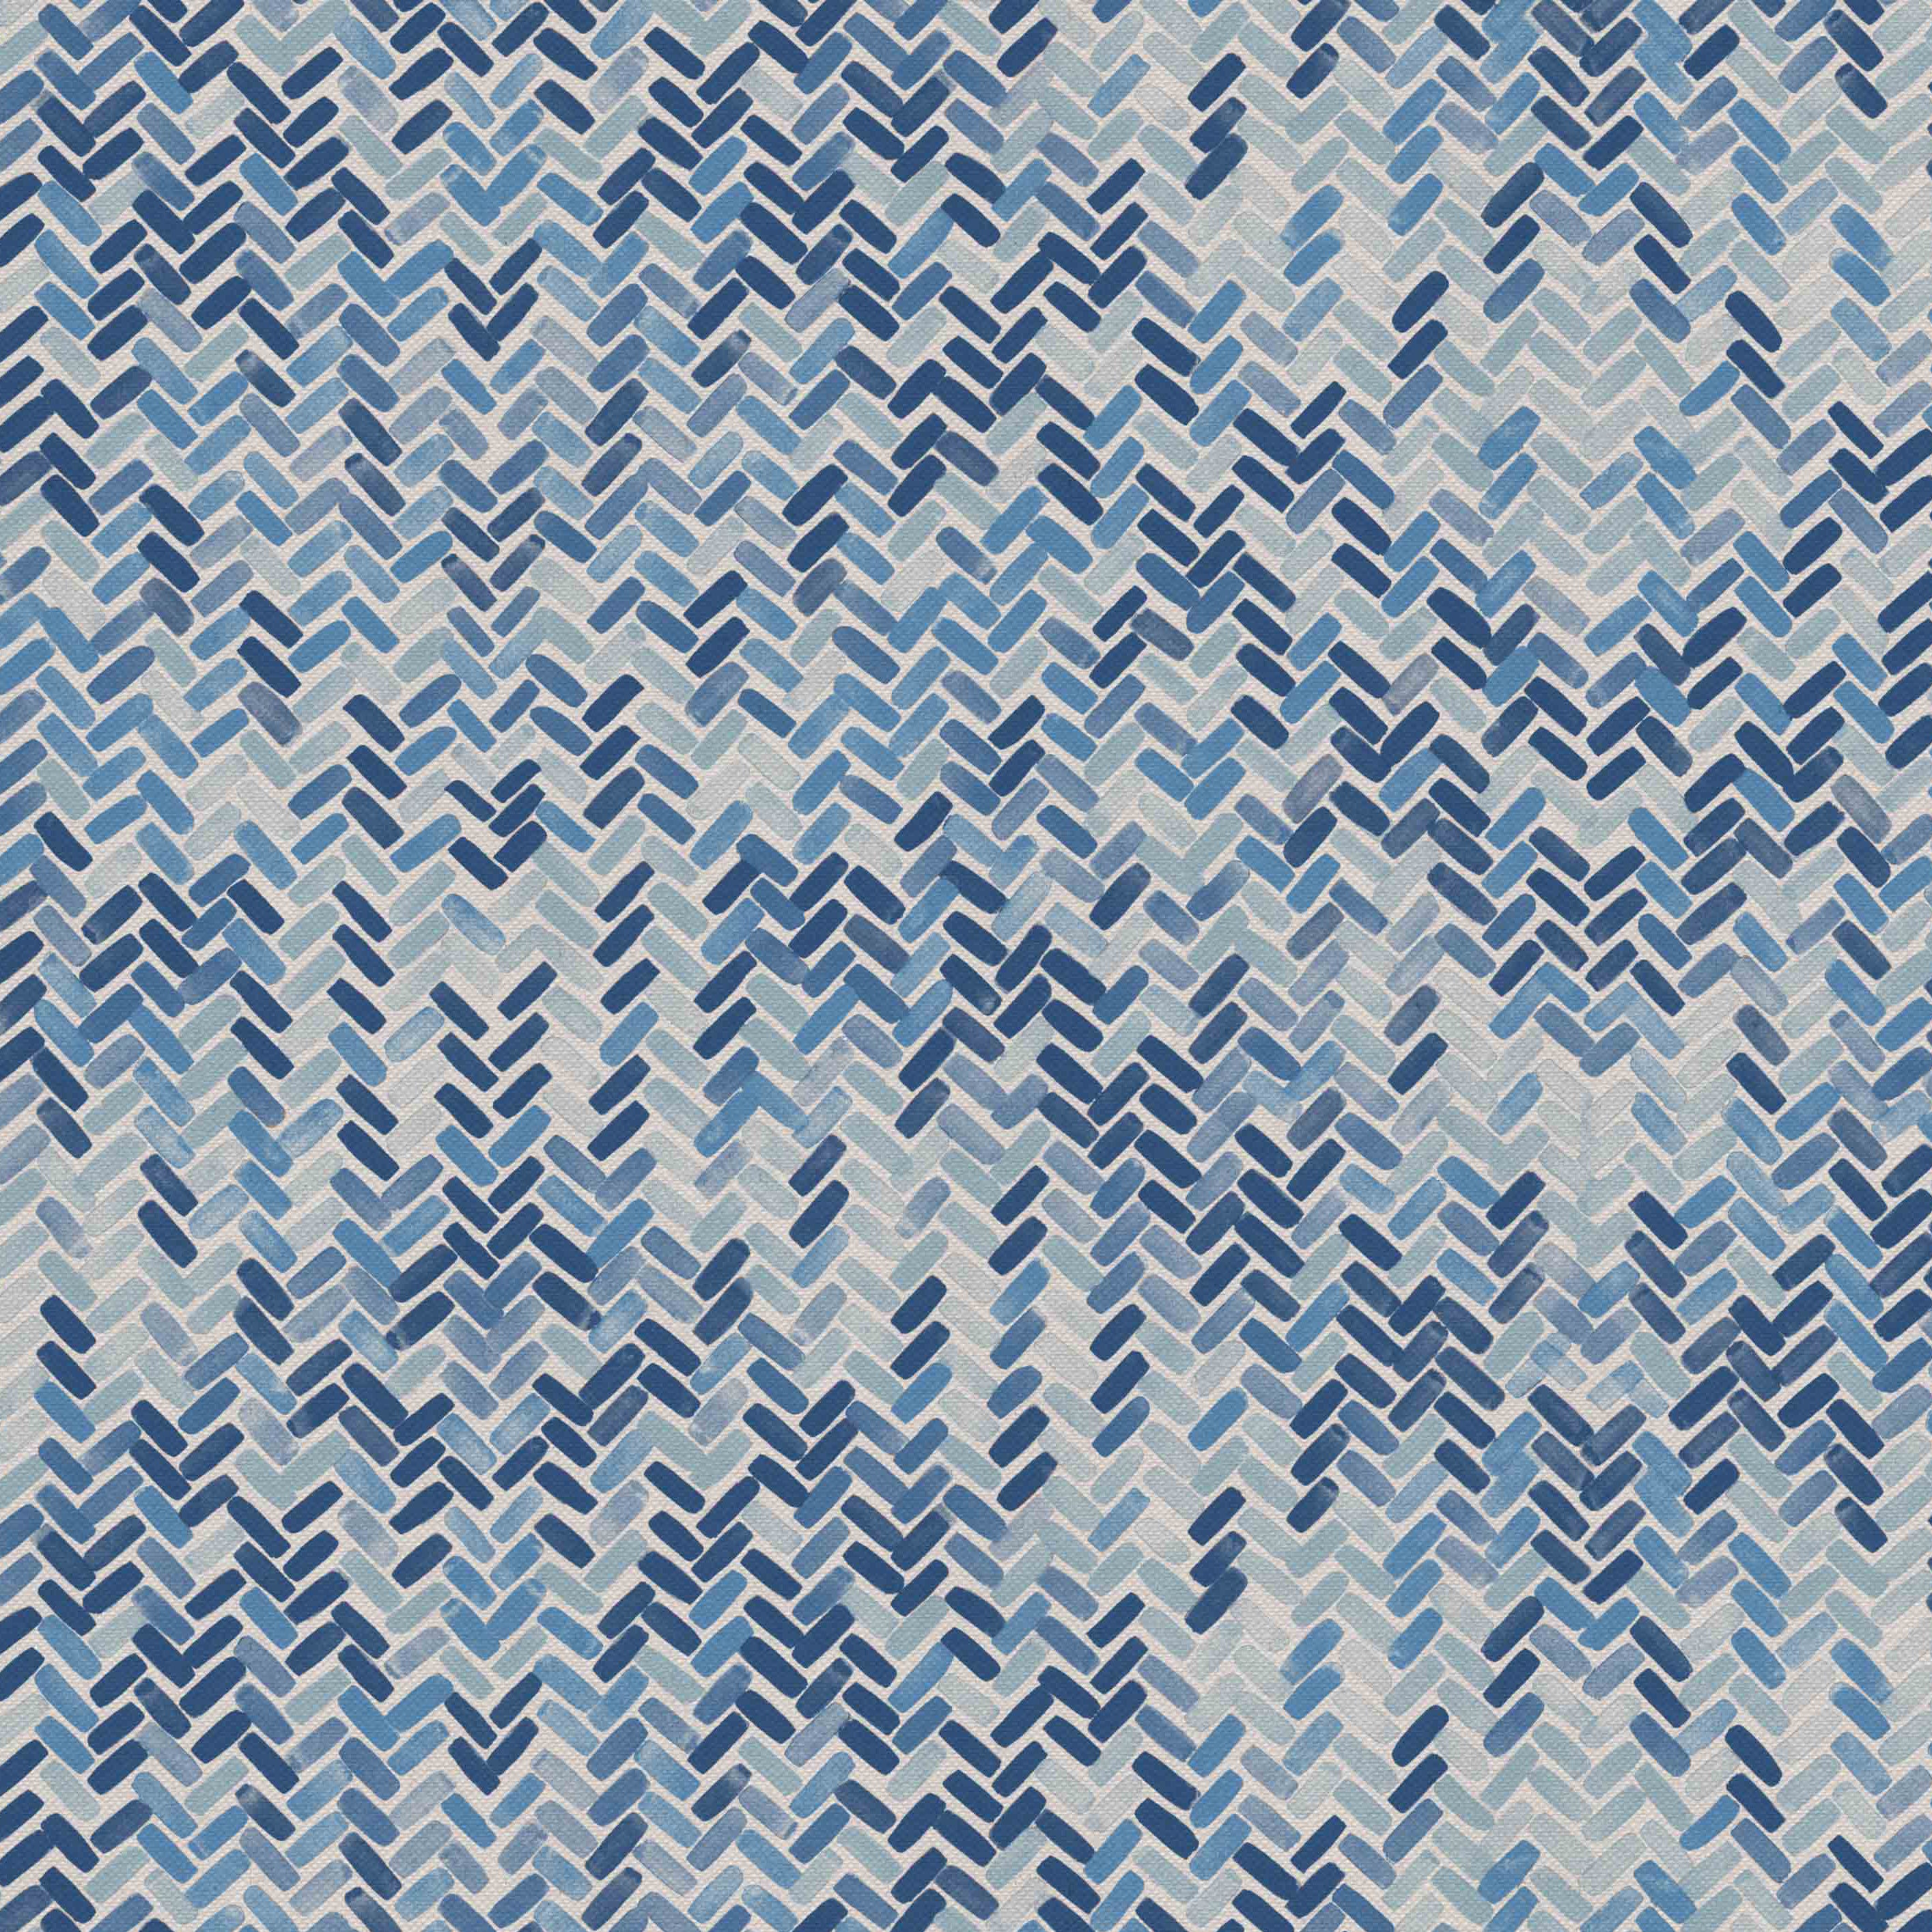 Detail of fabric in a thatched herringbone pattern in shades of blue and navy.